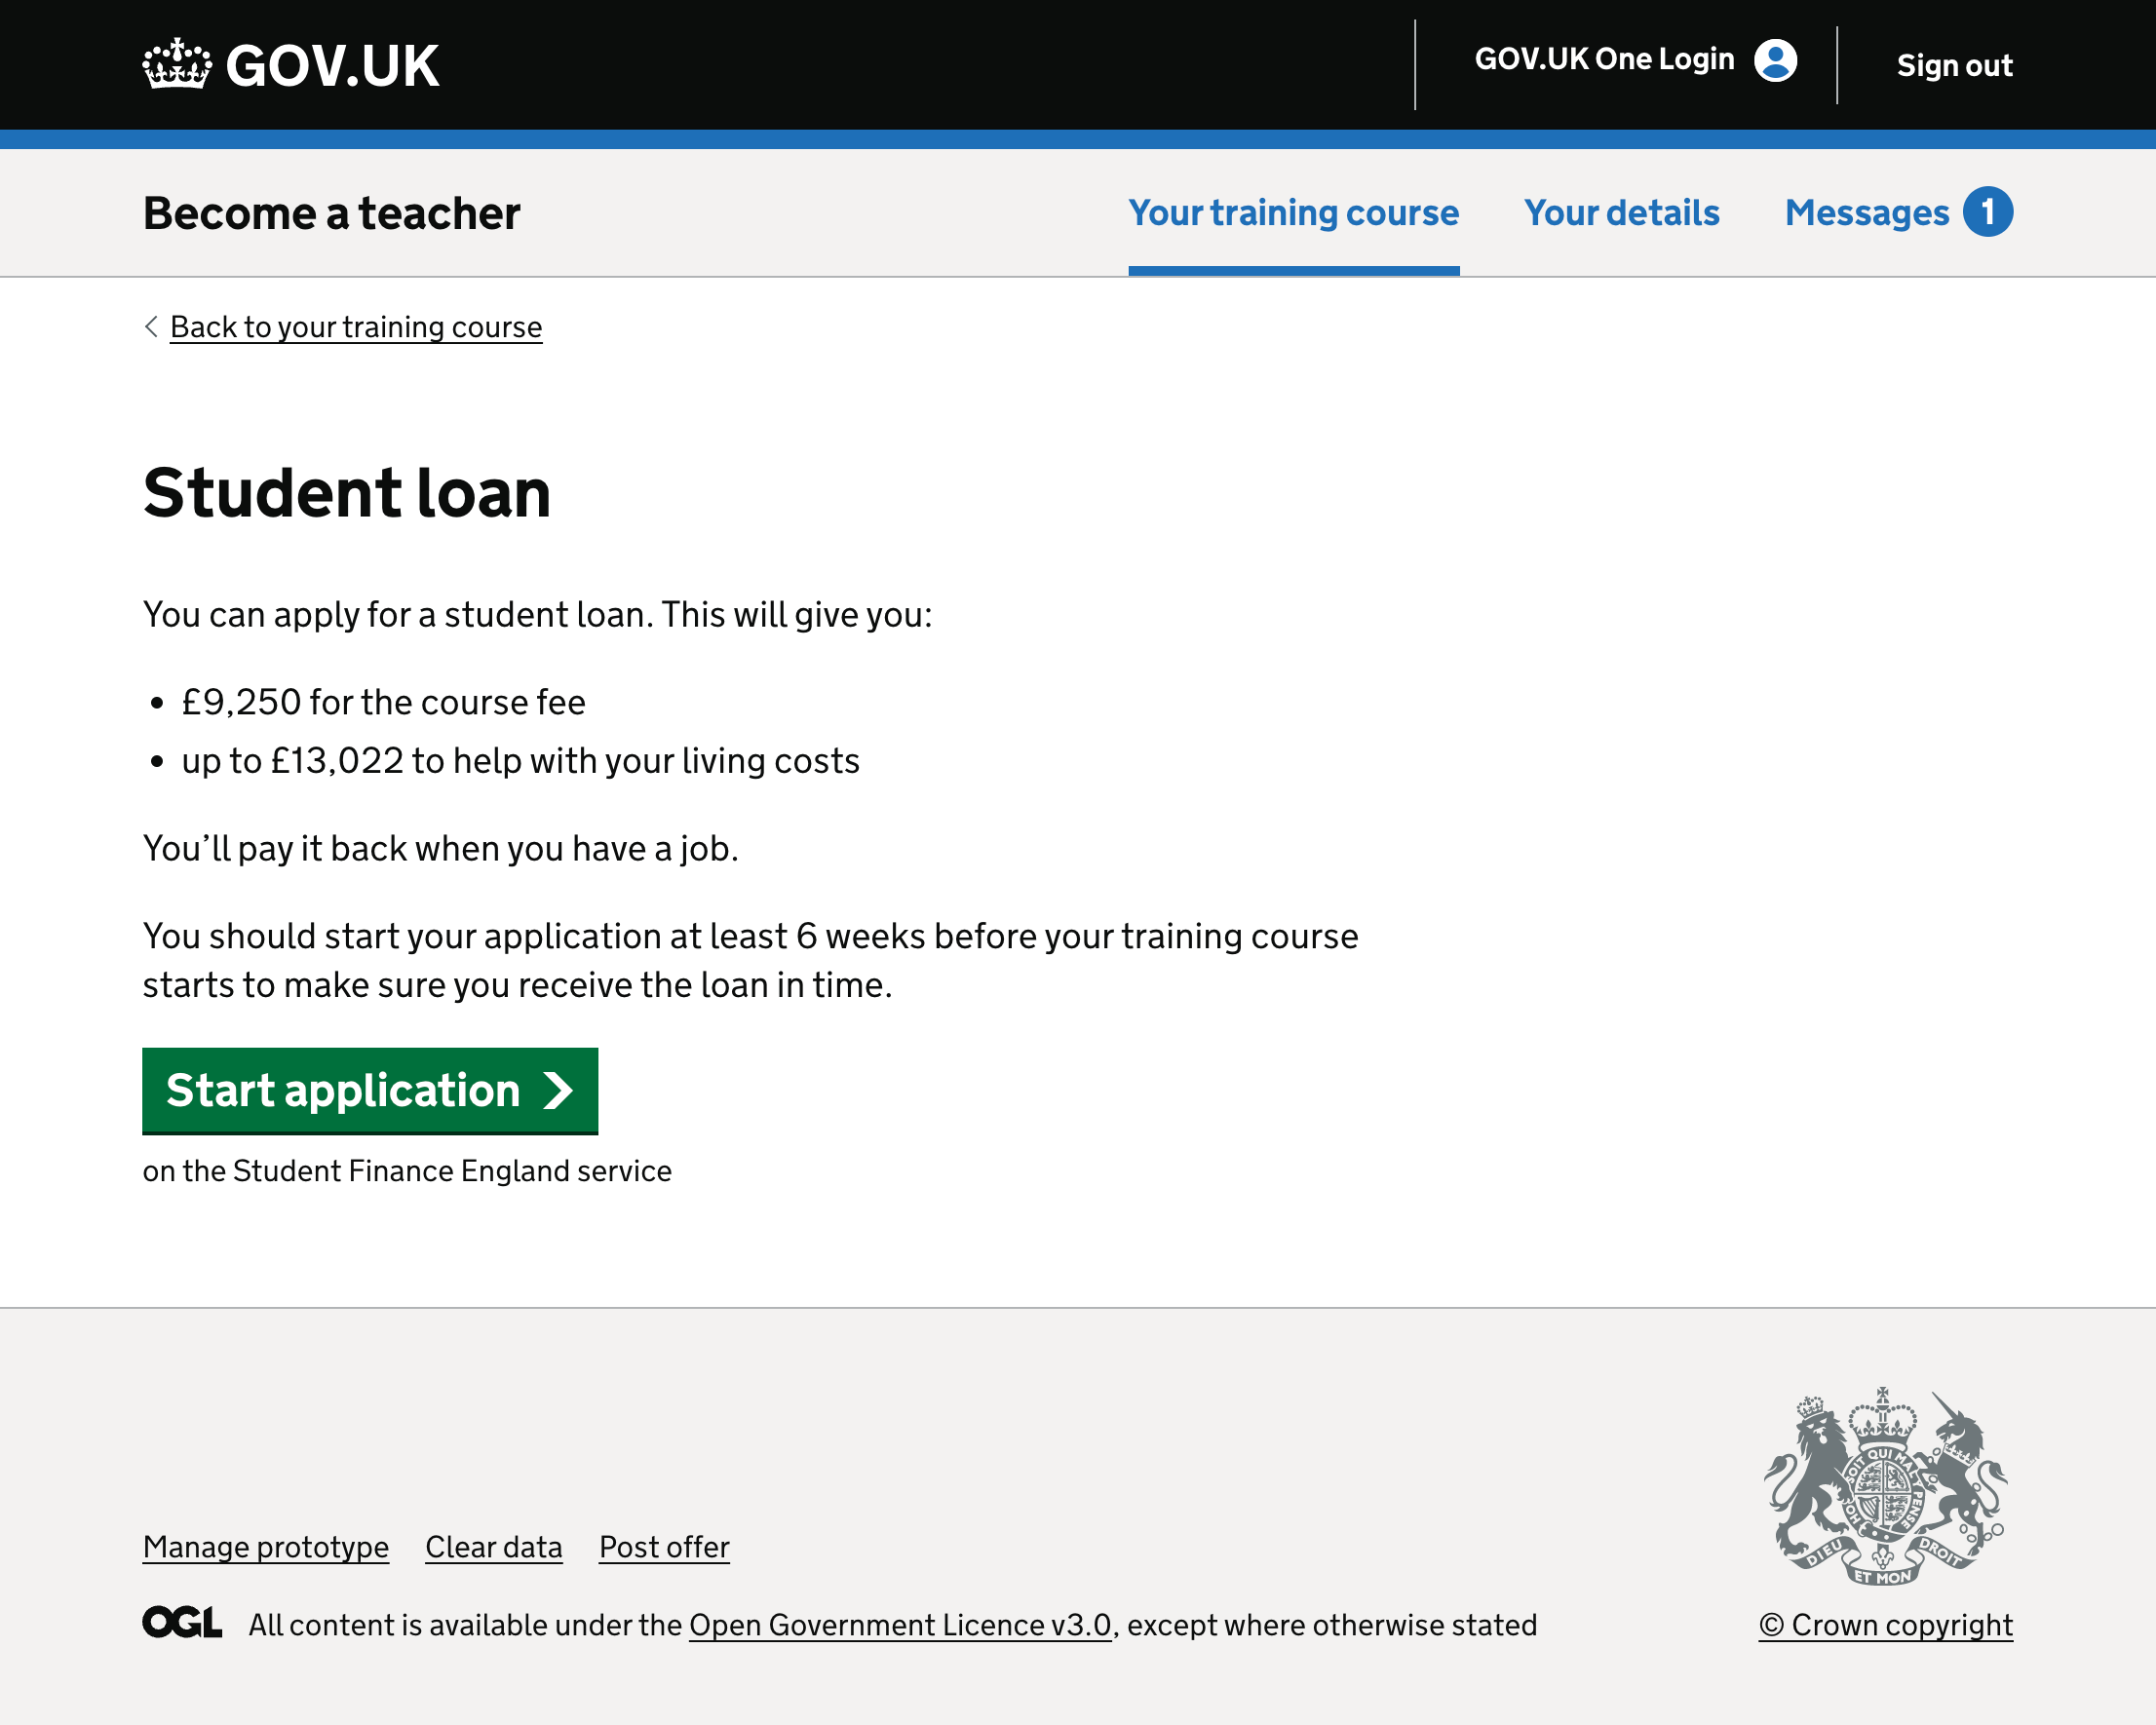 Screenshot inviting trainees to apply for a student loan